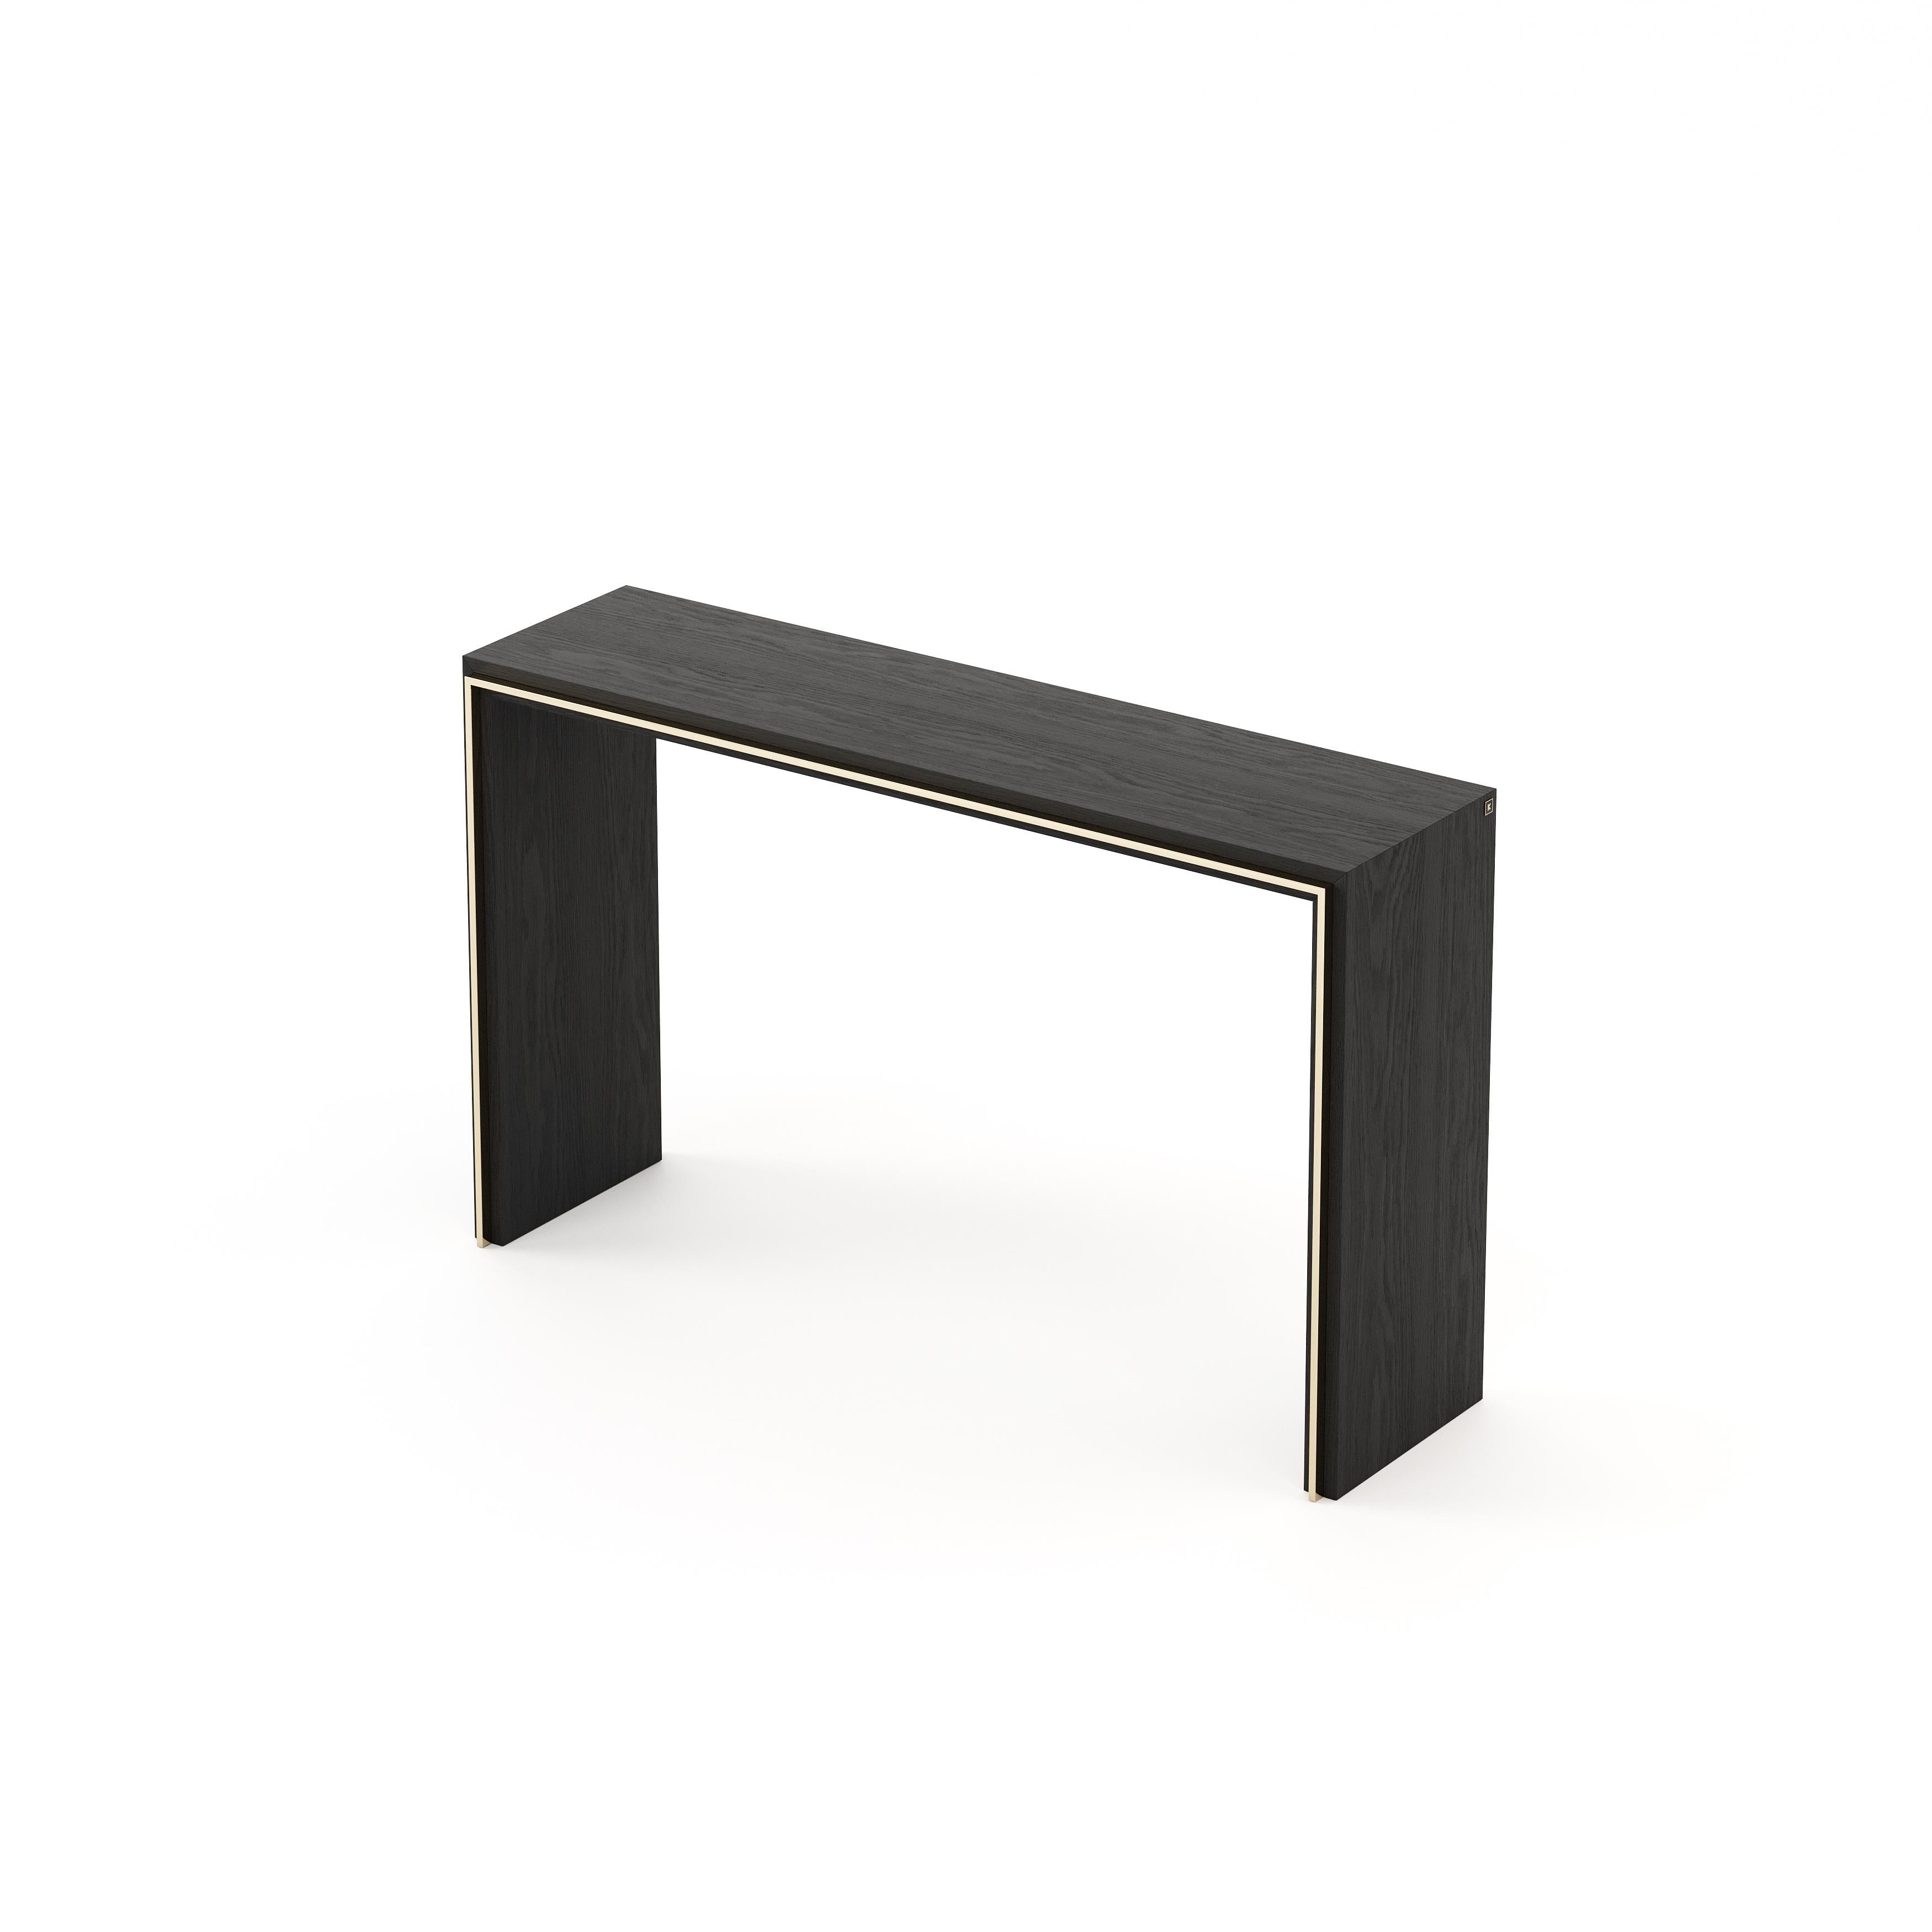 Rory console brings an elegant touch to any decor. A minimalist console table design carefully handmade in Portugal. Perfect for classic and modern entrance halls!



* Available in different finishes.
** Other custom sizes upon request.